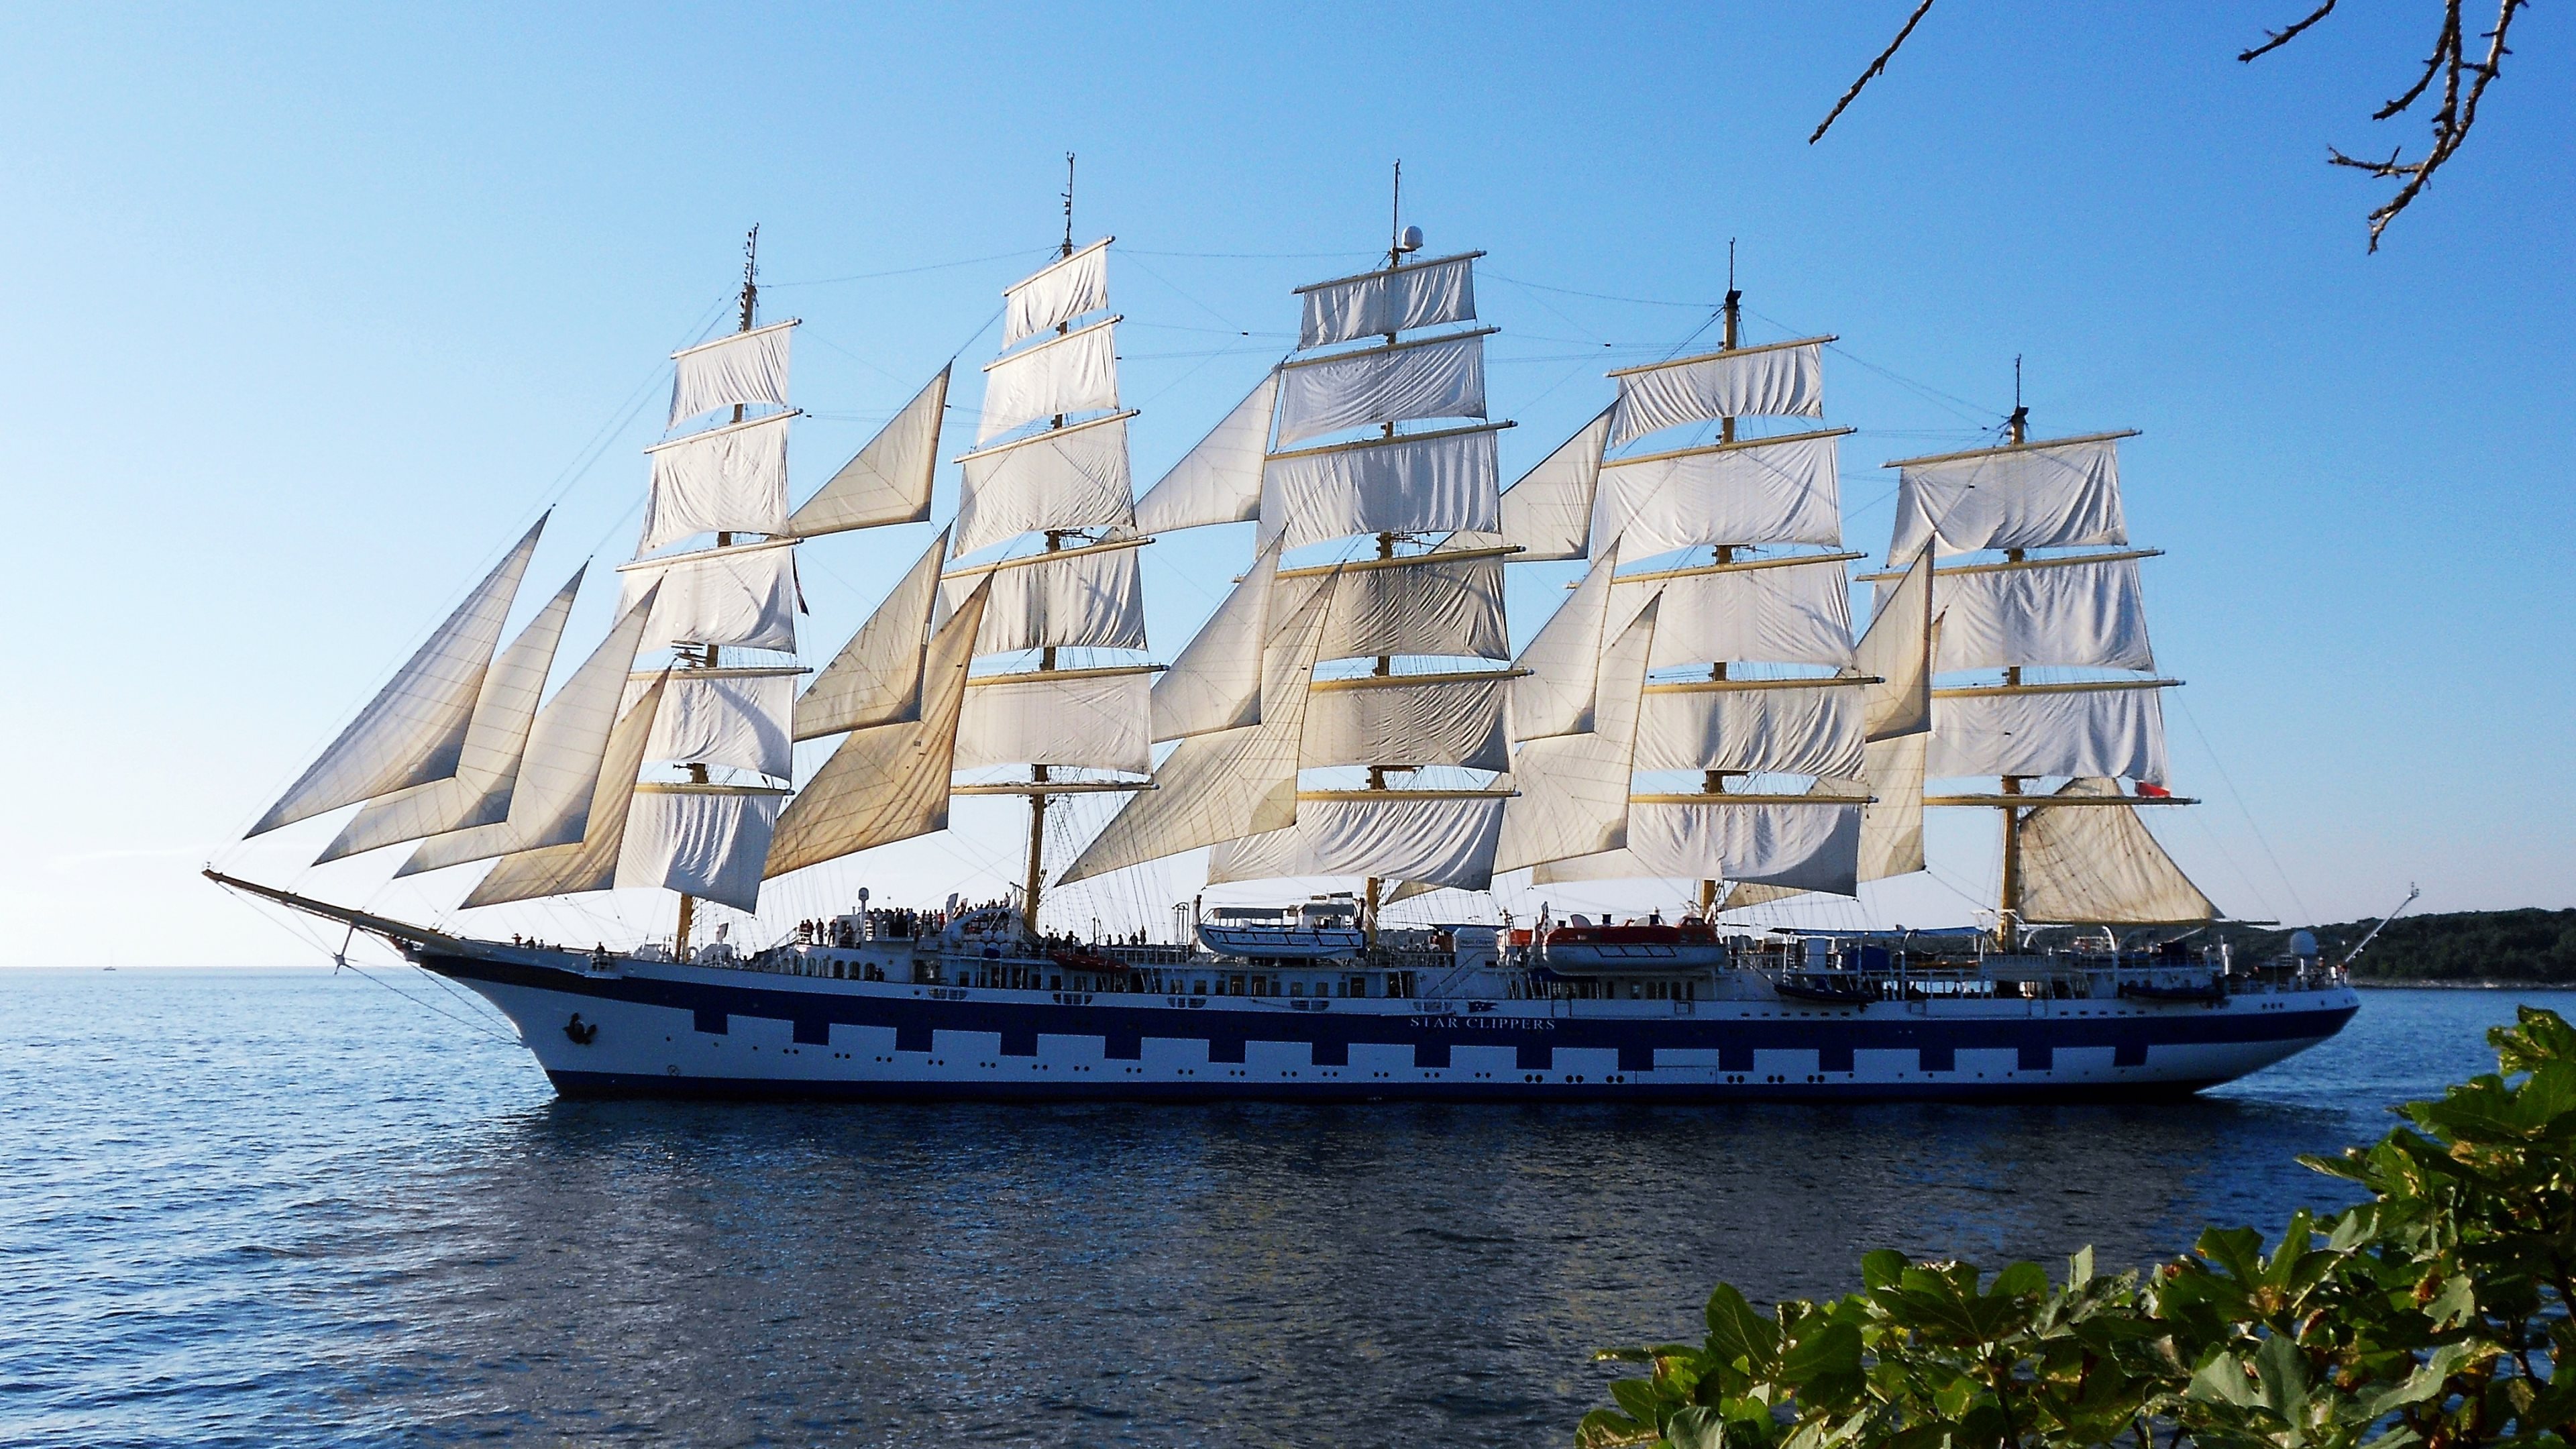 Star Clipper is a four masted barquentine built as a cruise ship